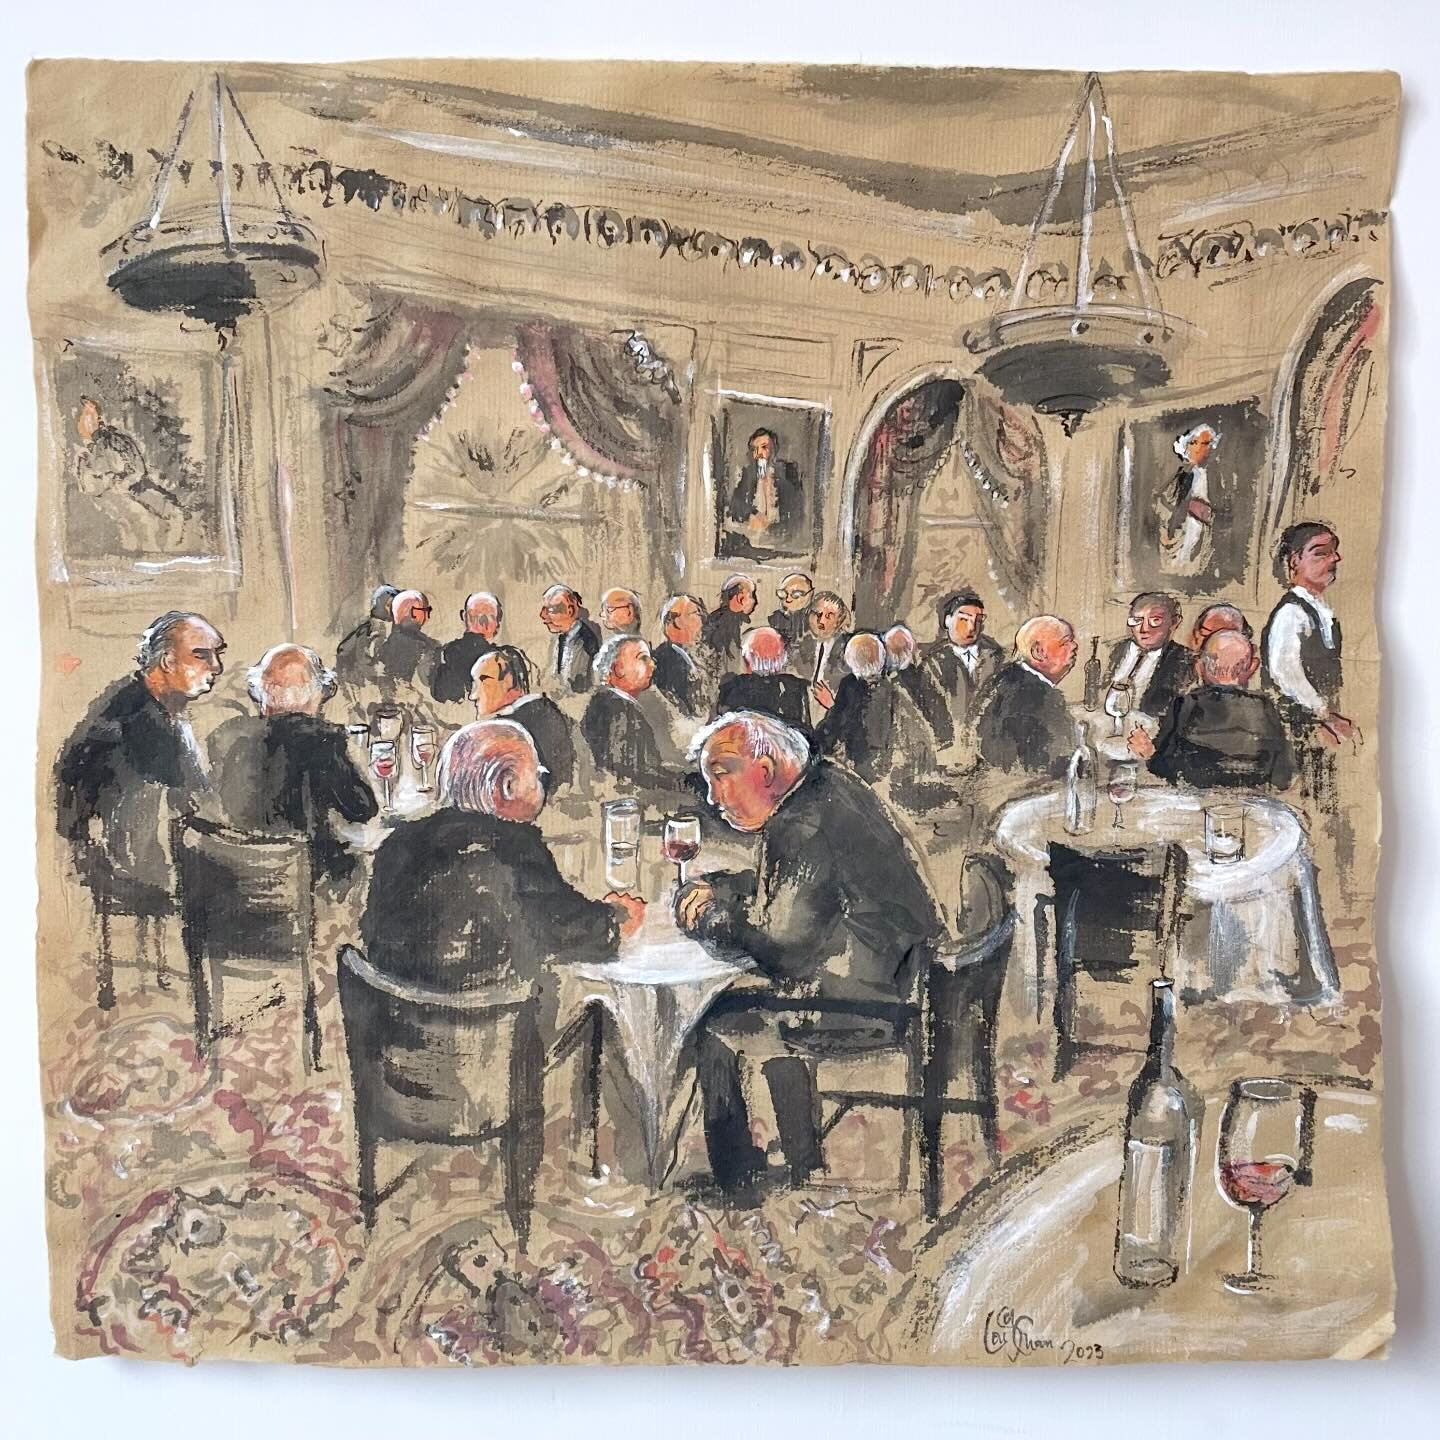 East India Gentlemen&rsquo;s Club, St James&rsquo;s Square. Chinese inks and acrylic on bamboo grass paper. Back wall displays portraits of Warren Hastings and &lsquo;Clive of India&rsquo; 1st Baron Clive&hellip; mostly from online references.. Bufto